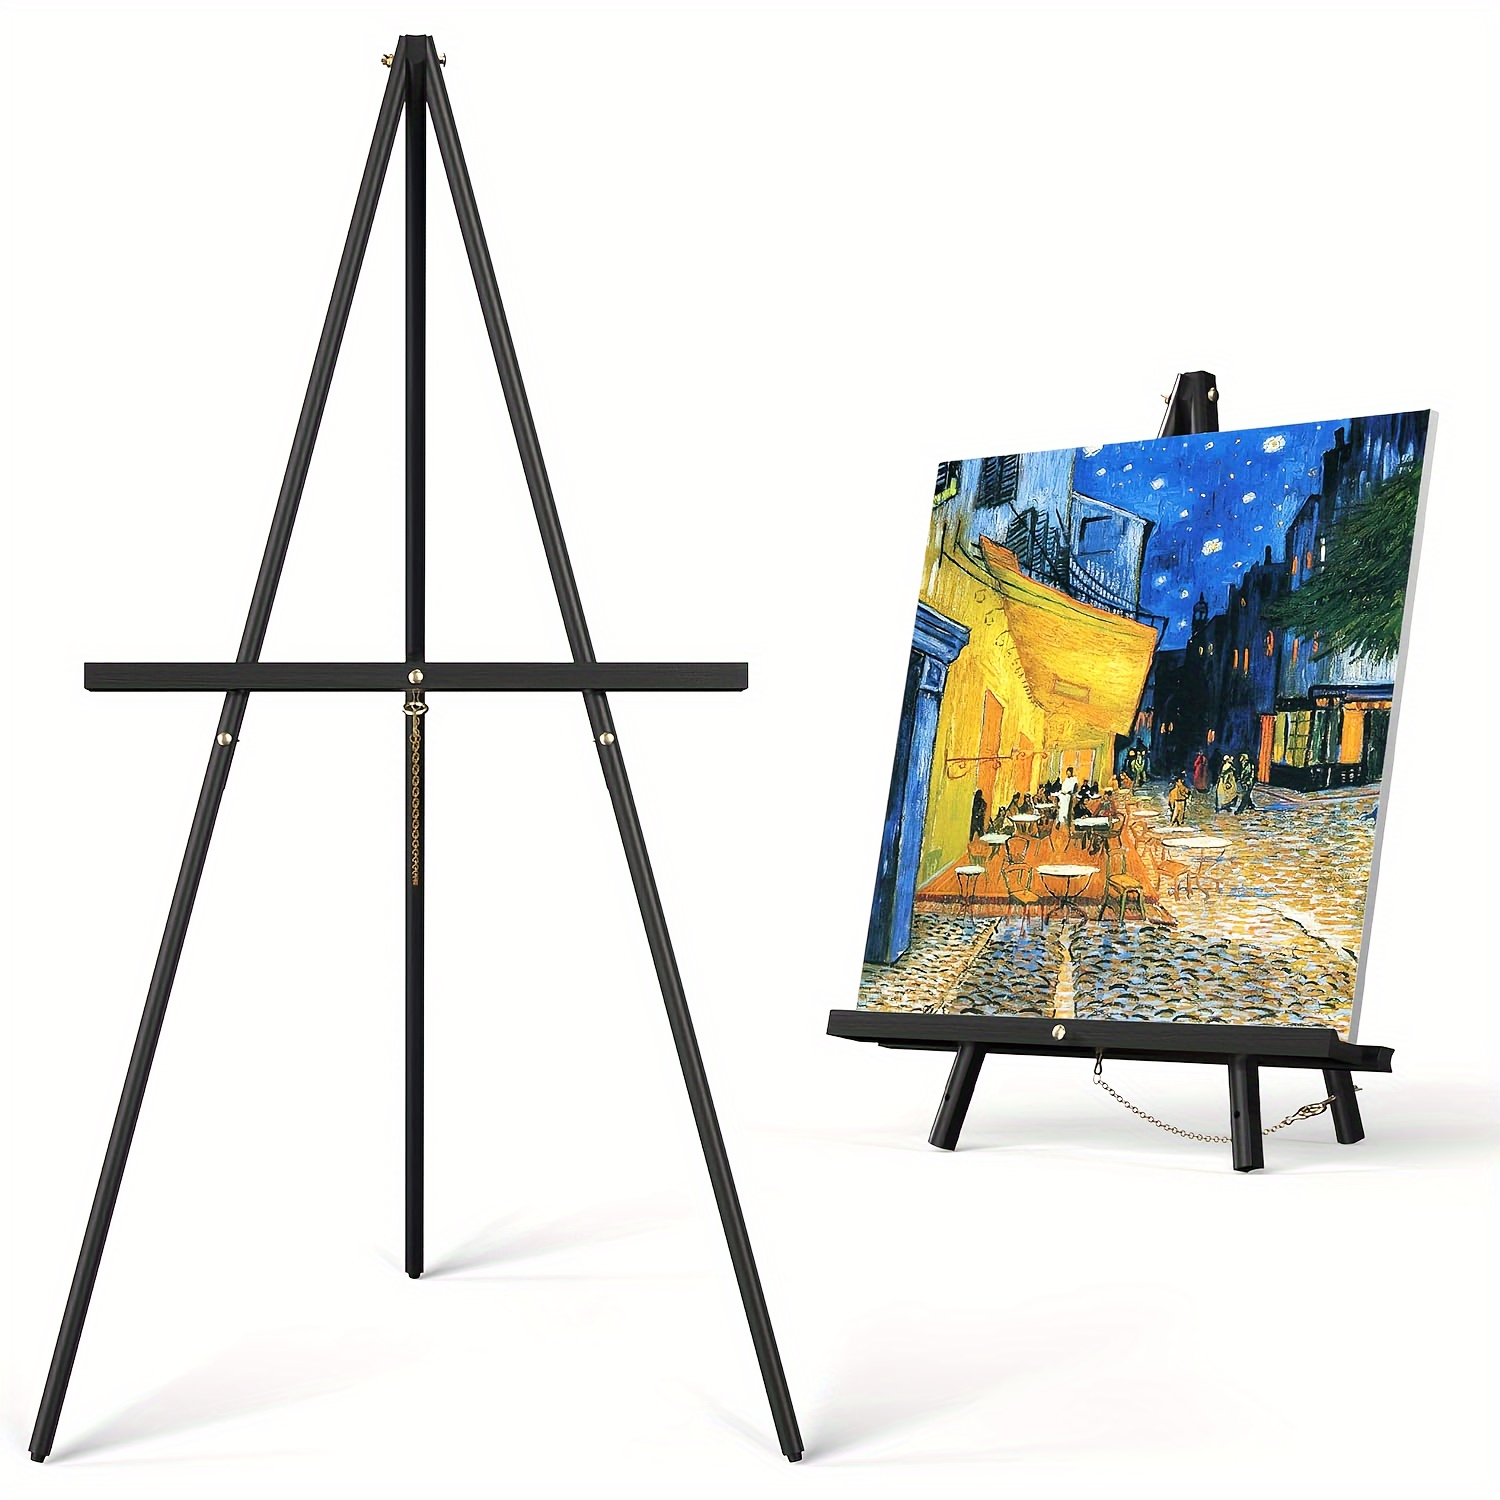 

1 Pc-art Easel Wooden Stand - 63" Portable Tripod Display Artist Easel - Adjustable Floor Wood Poster Stand For Wedding, Painting, Drawing, Display Show